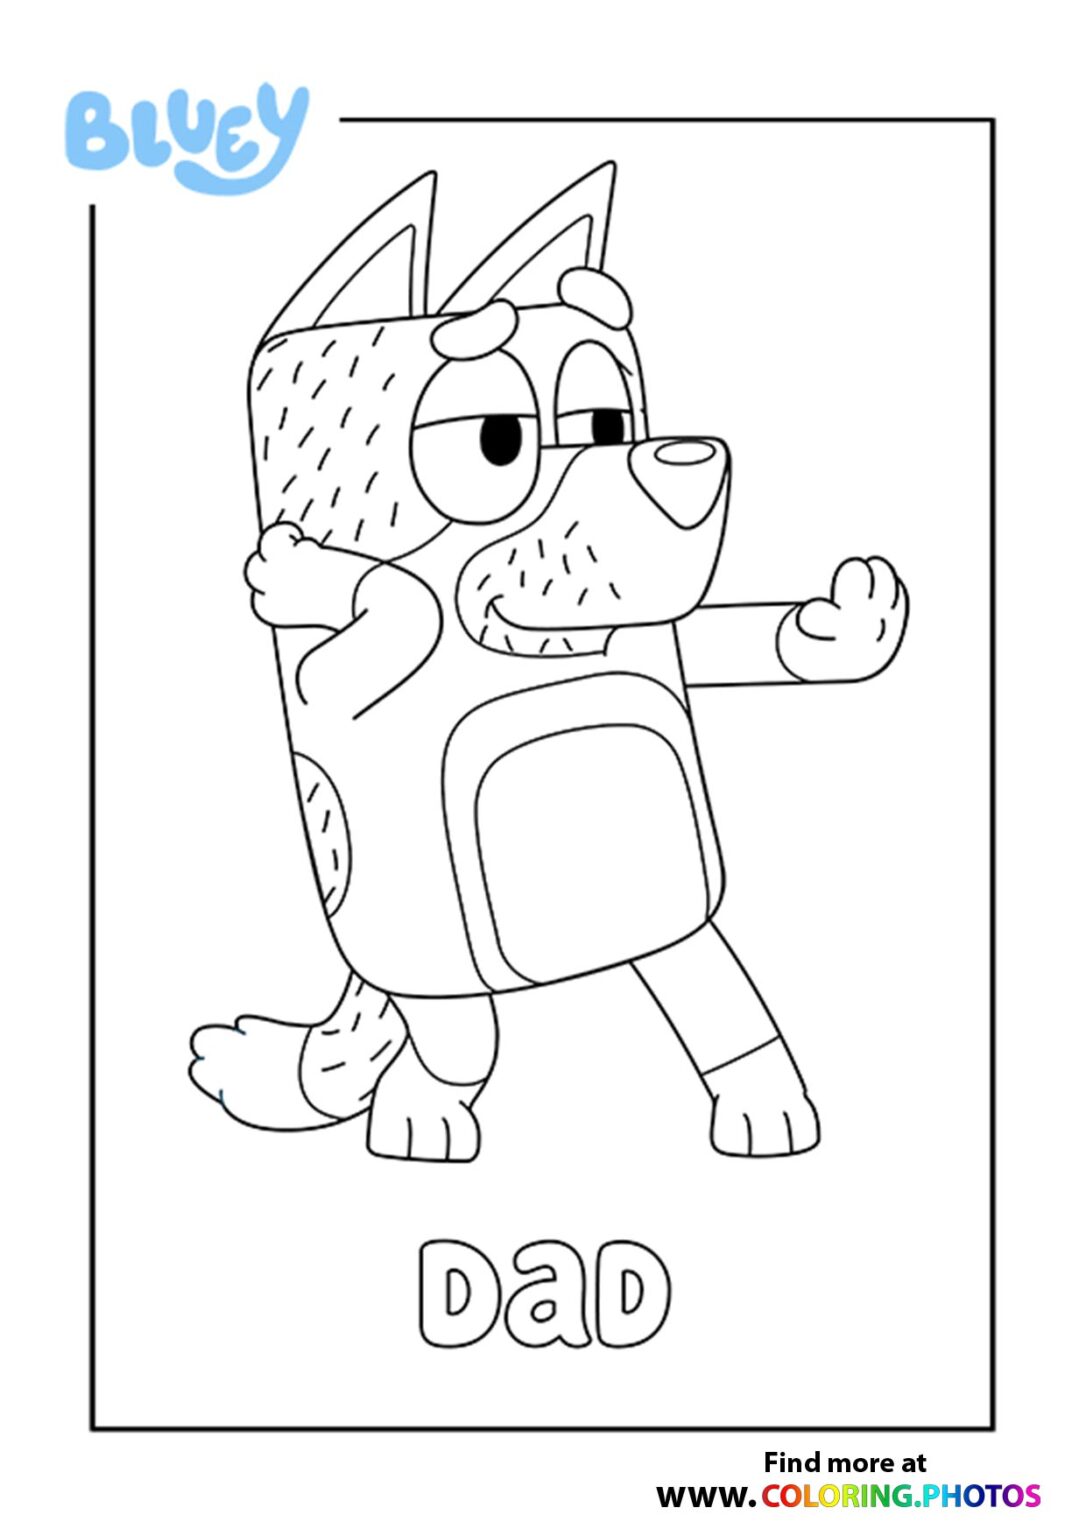 printable-bluey-coloring-pages-printable-world-holiday